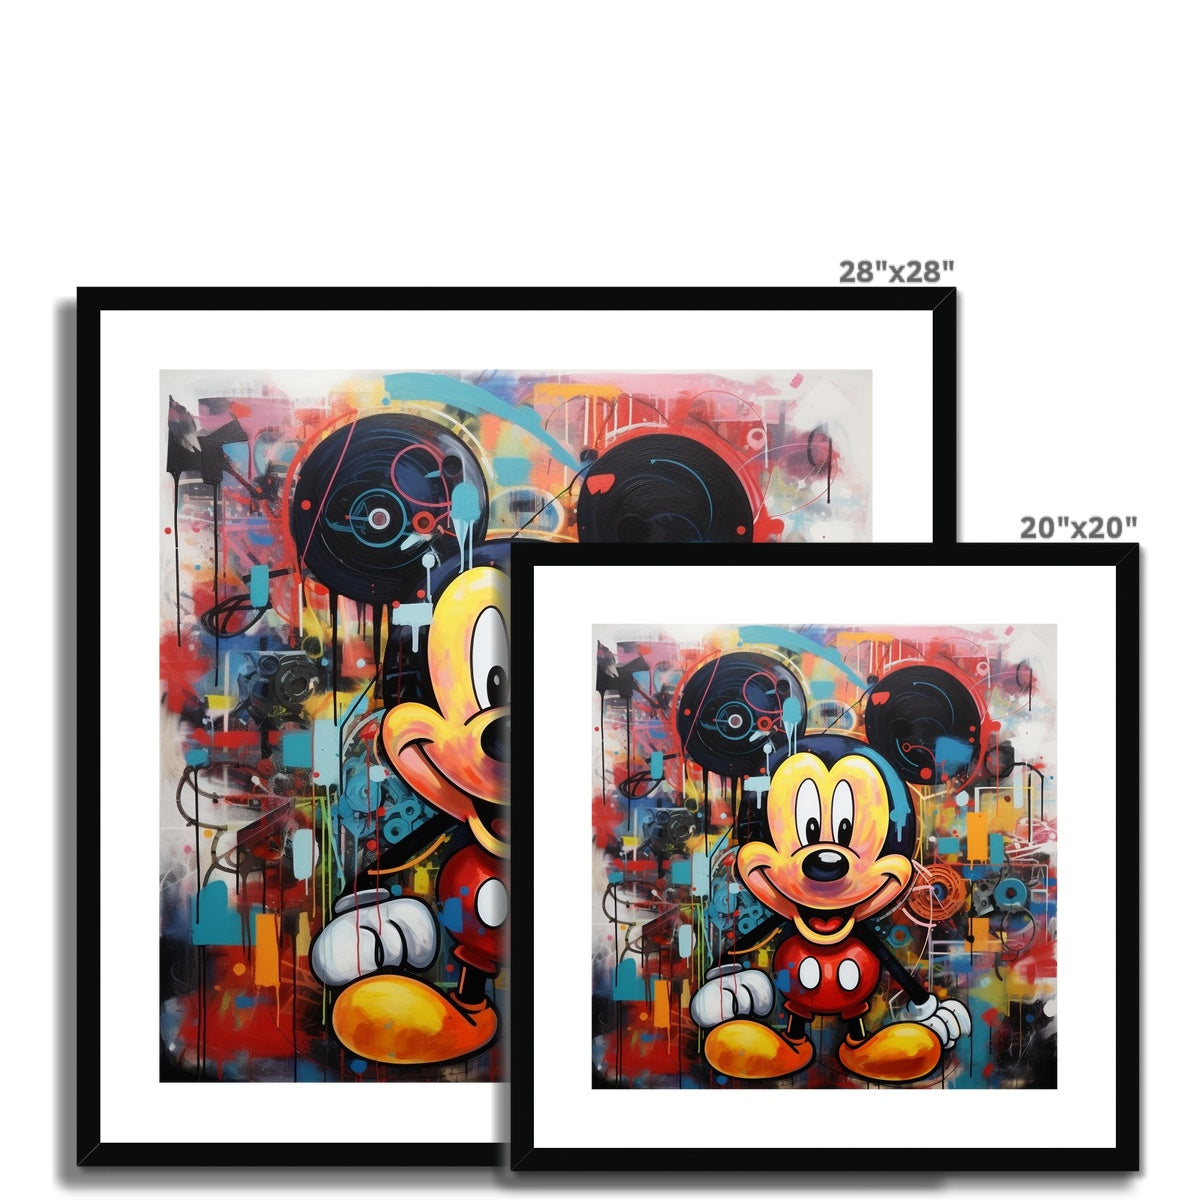 Micky Mouse Framed & Mounted Print